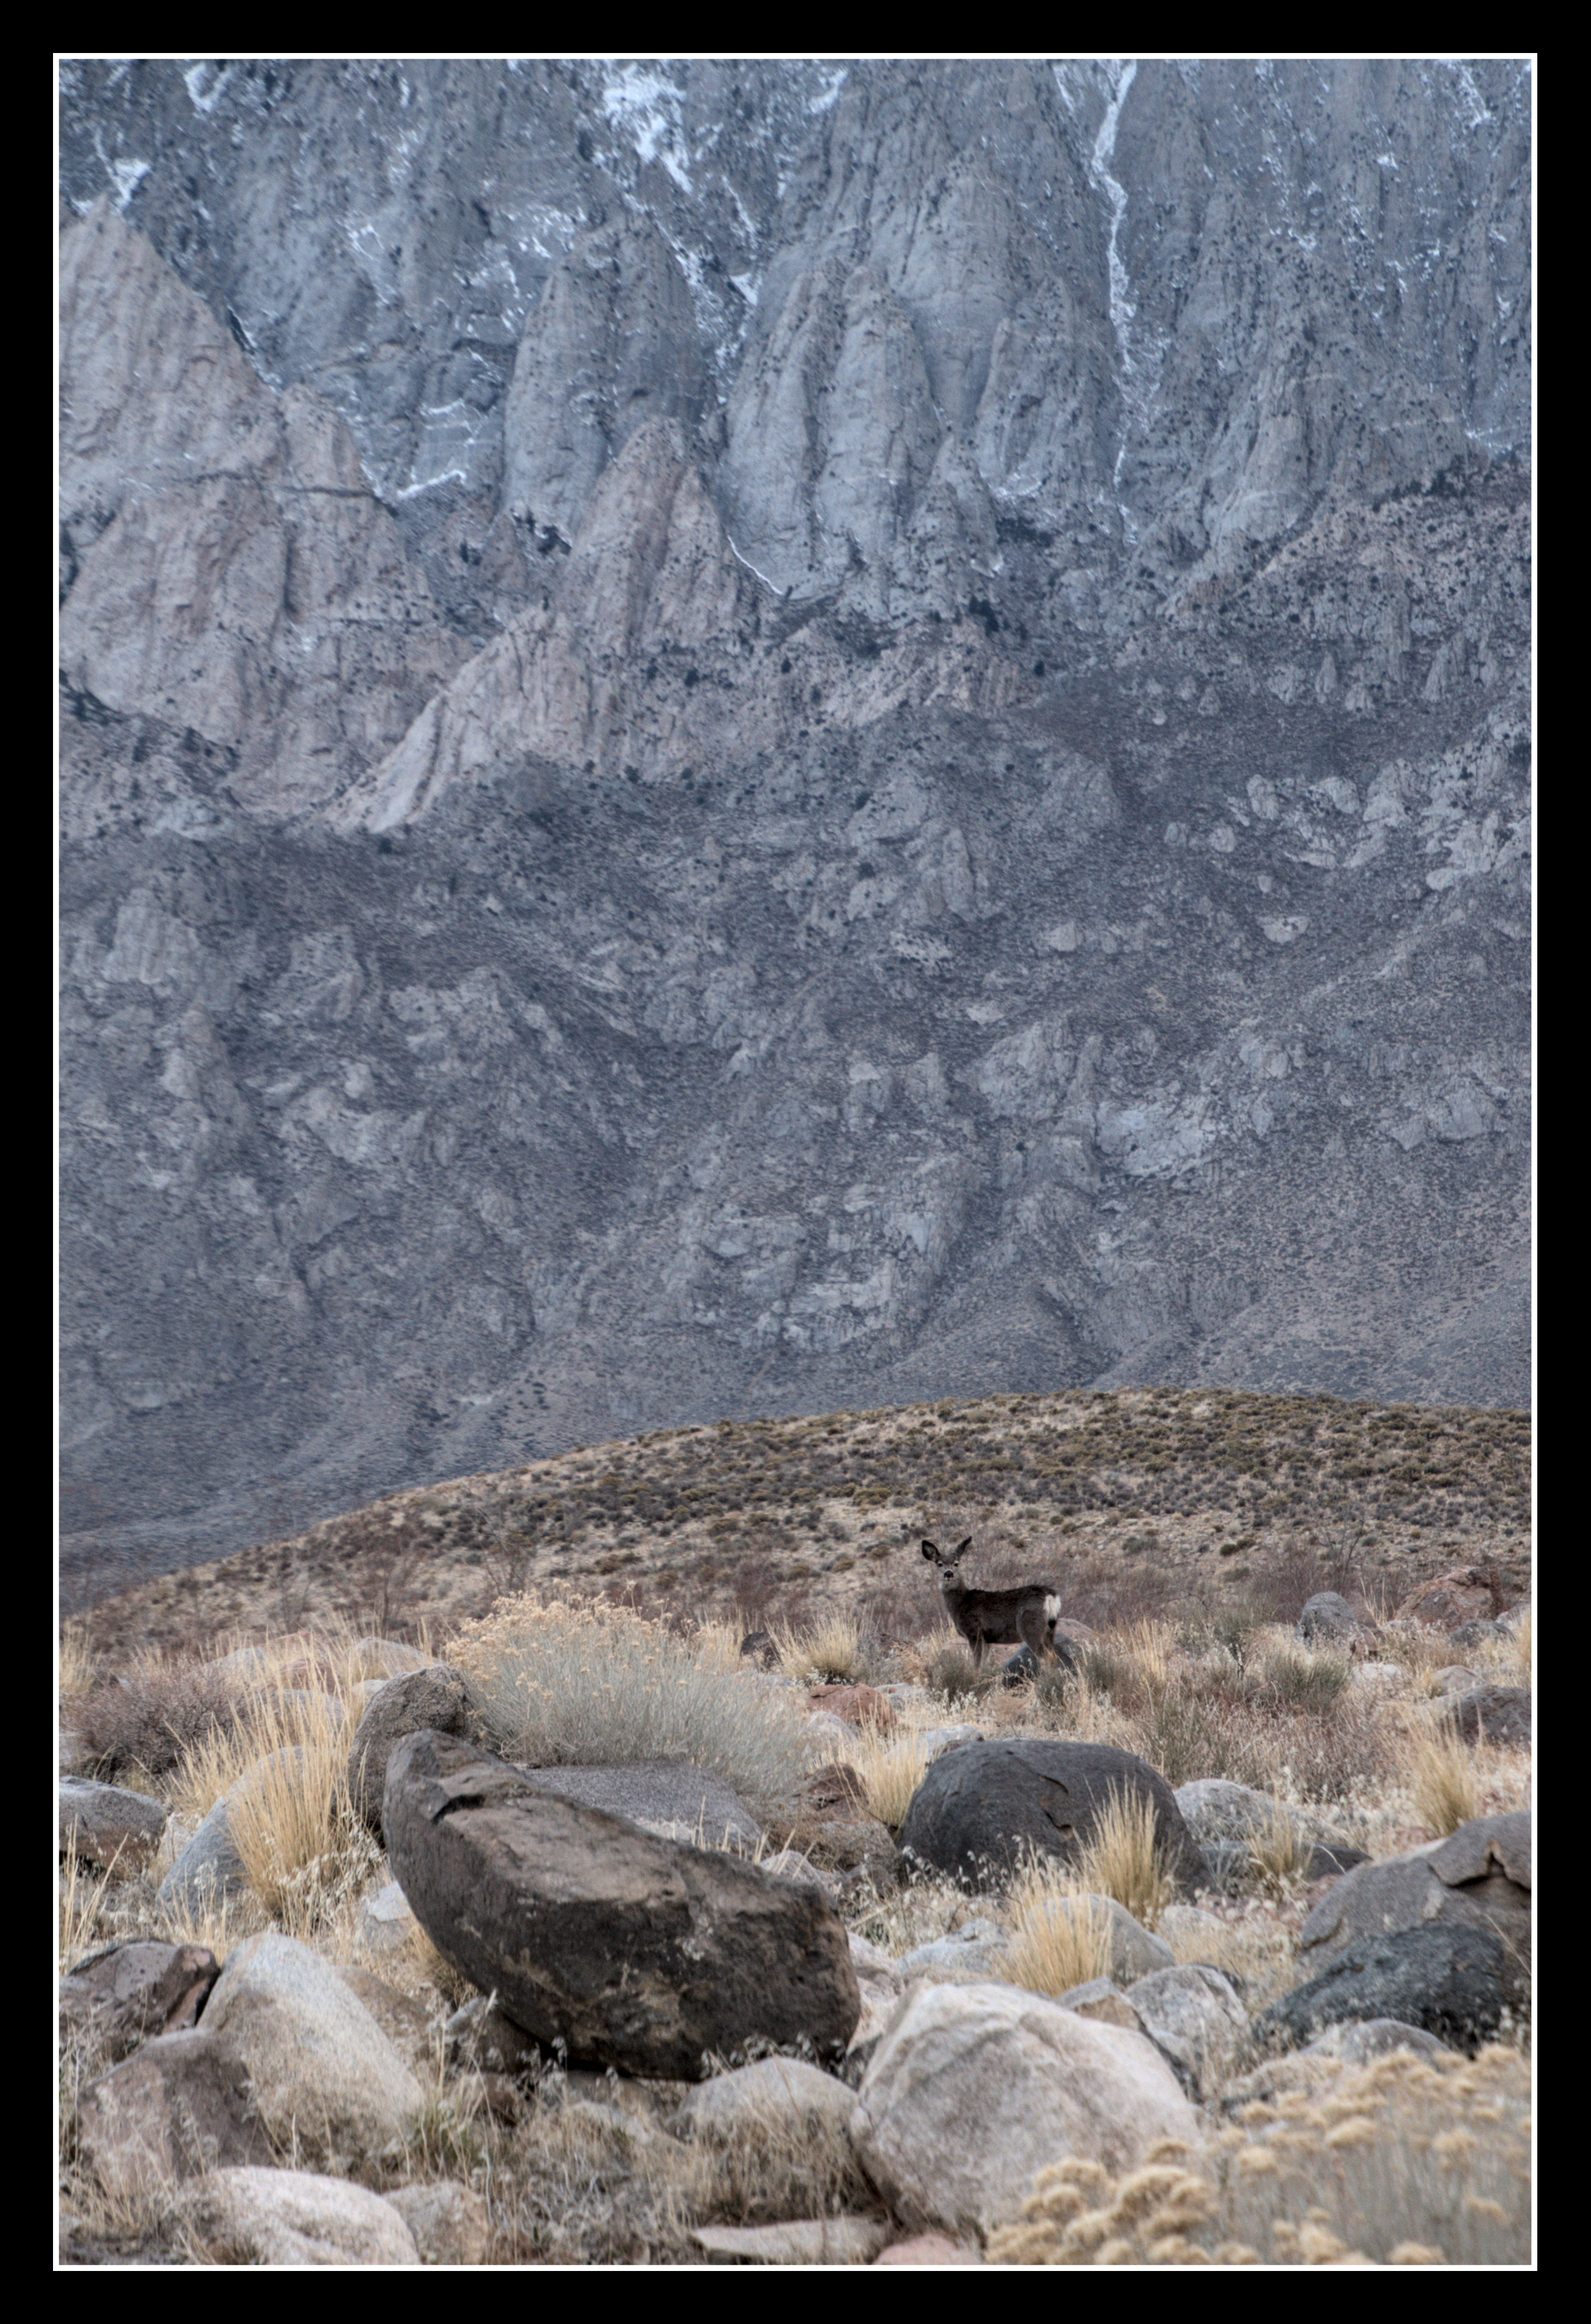 Mule deer stand on a valley floor. Behind them, a huge rock wall fills the view.